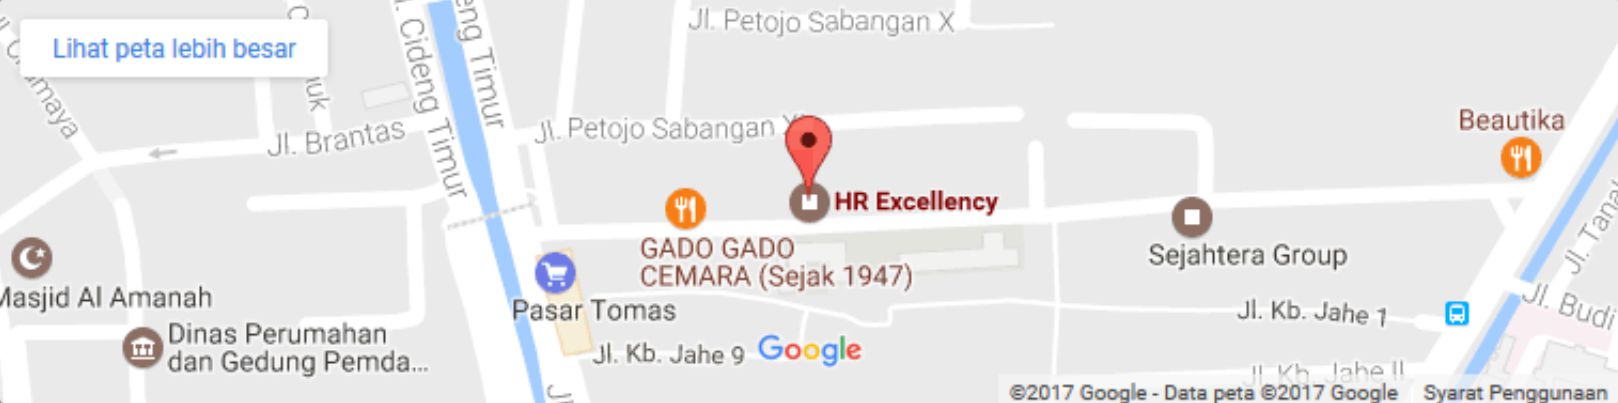 Location HR Excellency